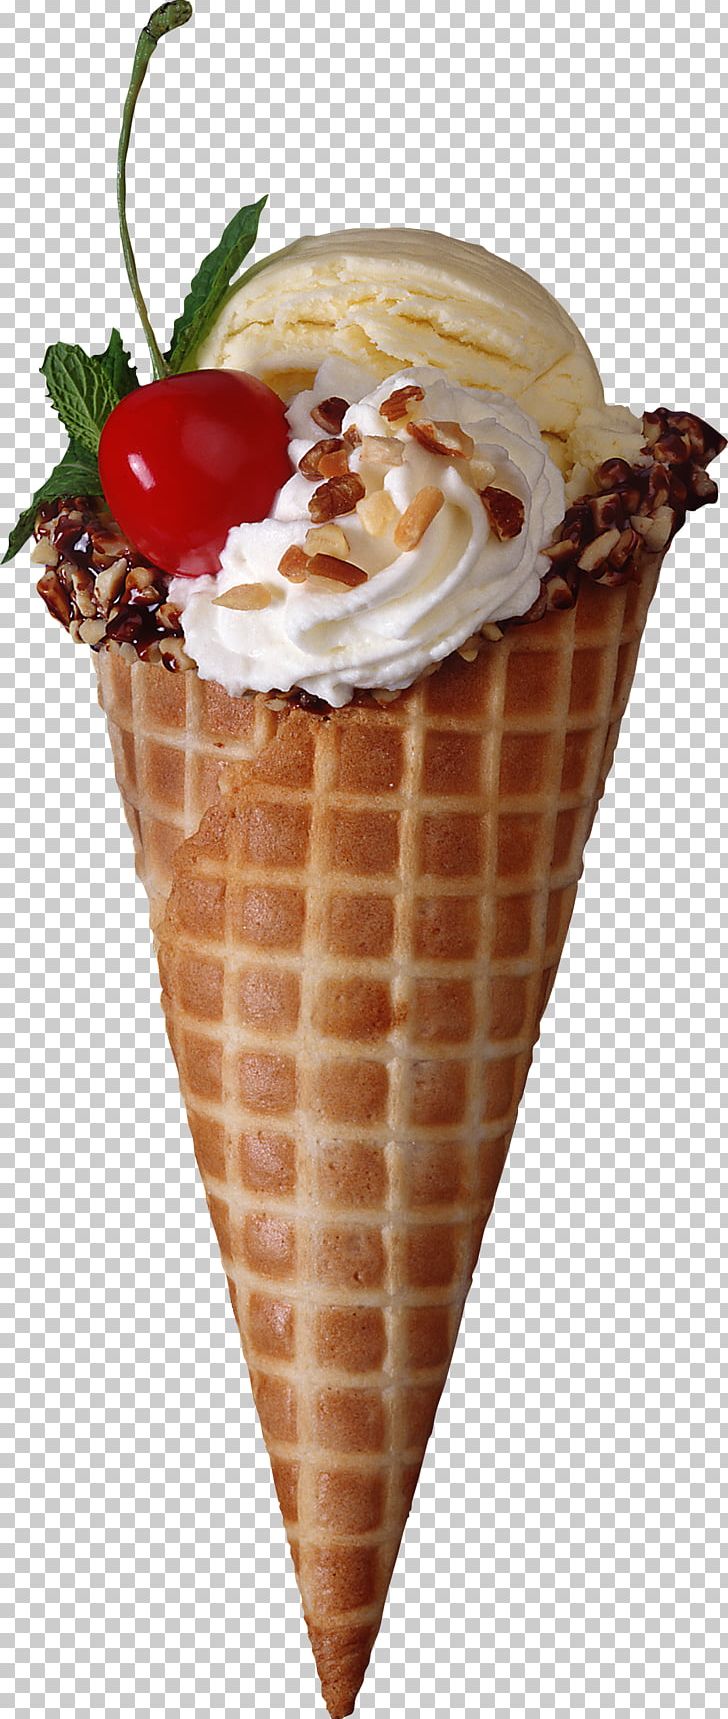 Ice Cream Cone Waffle Plombières Ice Cream PNG, Clipart, Biscuits, Chocolate Ice Cream, Cream, Dairy Product, Dessert Free PNG Download